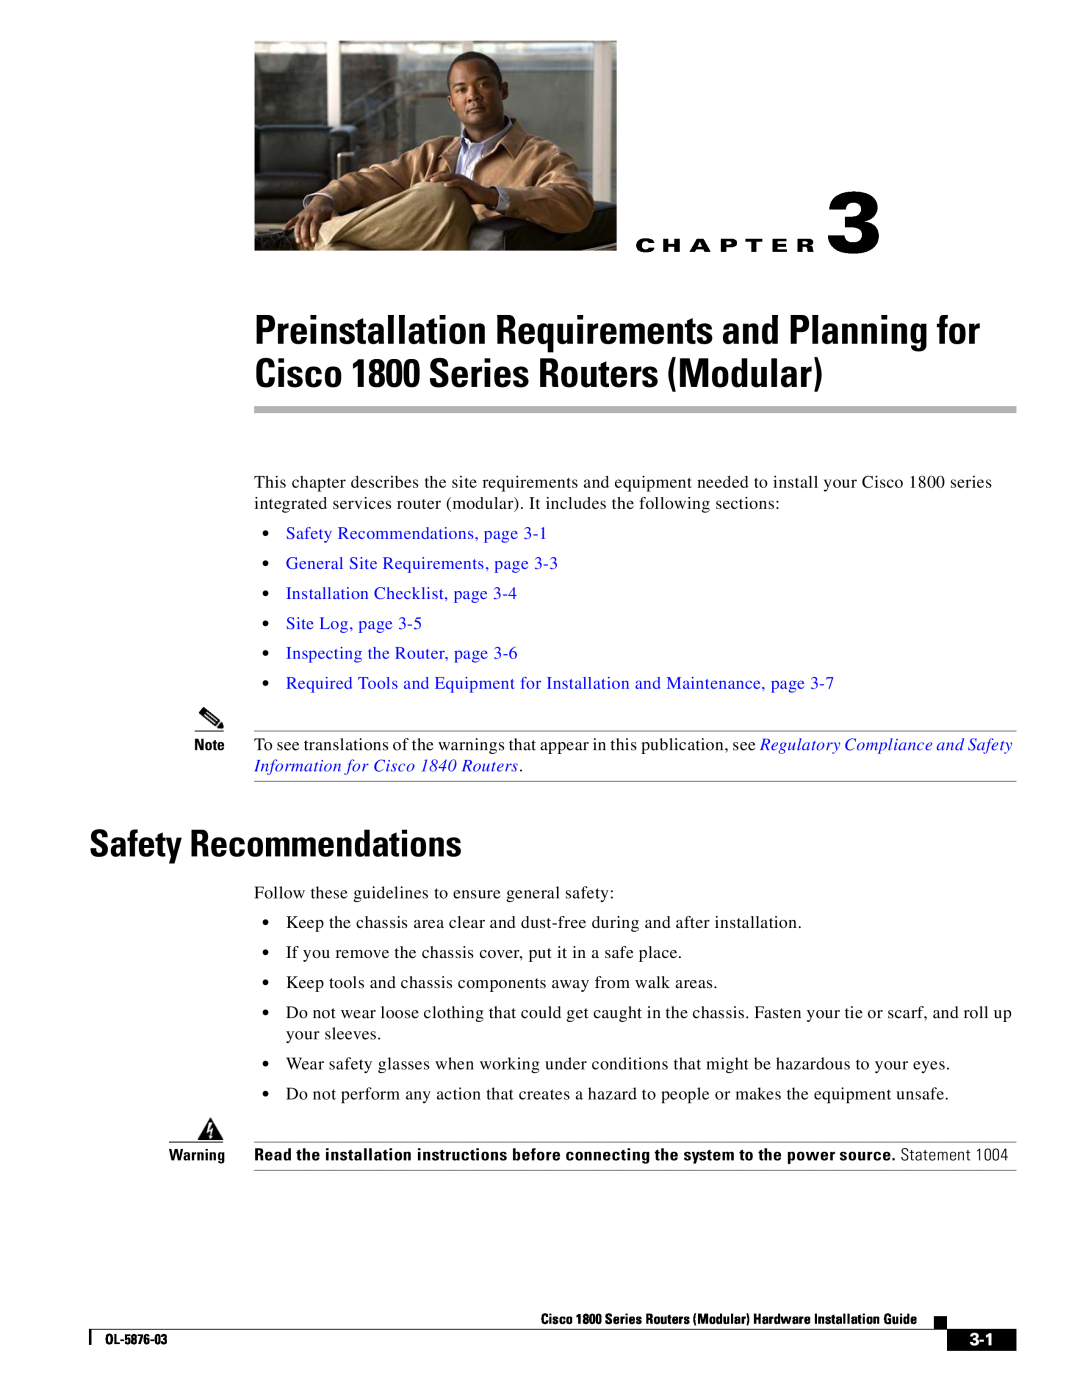 Cisco Systems CISCO1841-HSEC/K9-RF manual Safety Recommendations, page General Site Requirements, page, C H A P T E R 